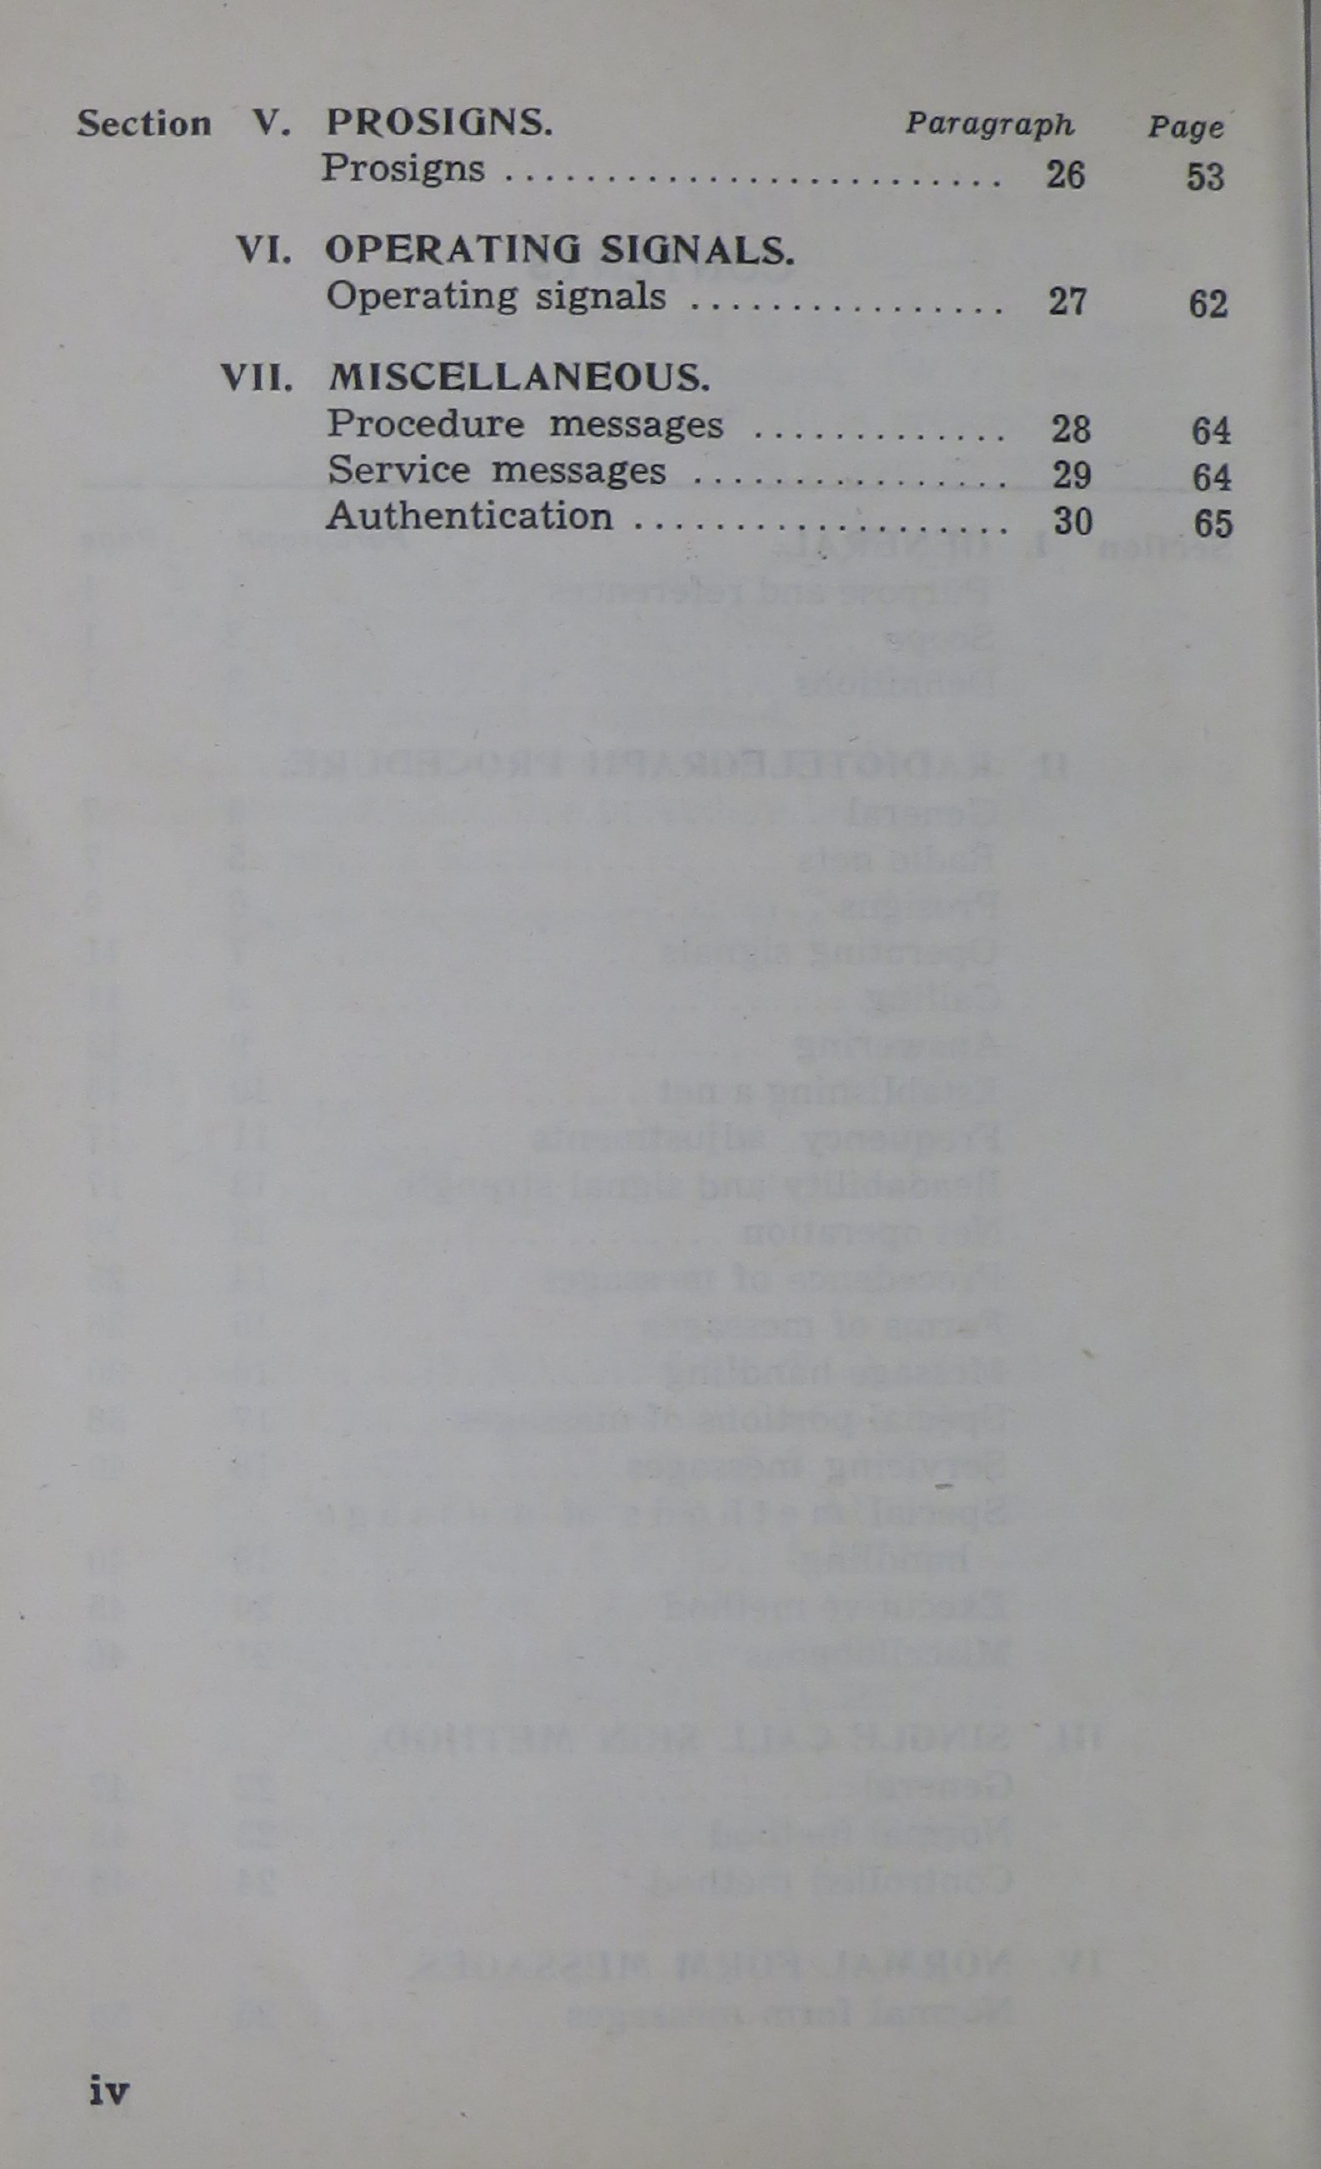 Sample page 6 from AirCorps Library document: Radio Operator's Manual